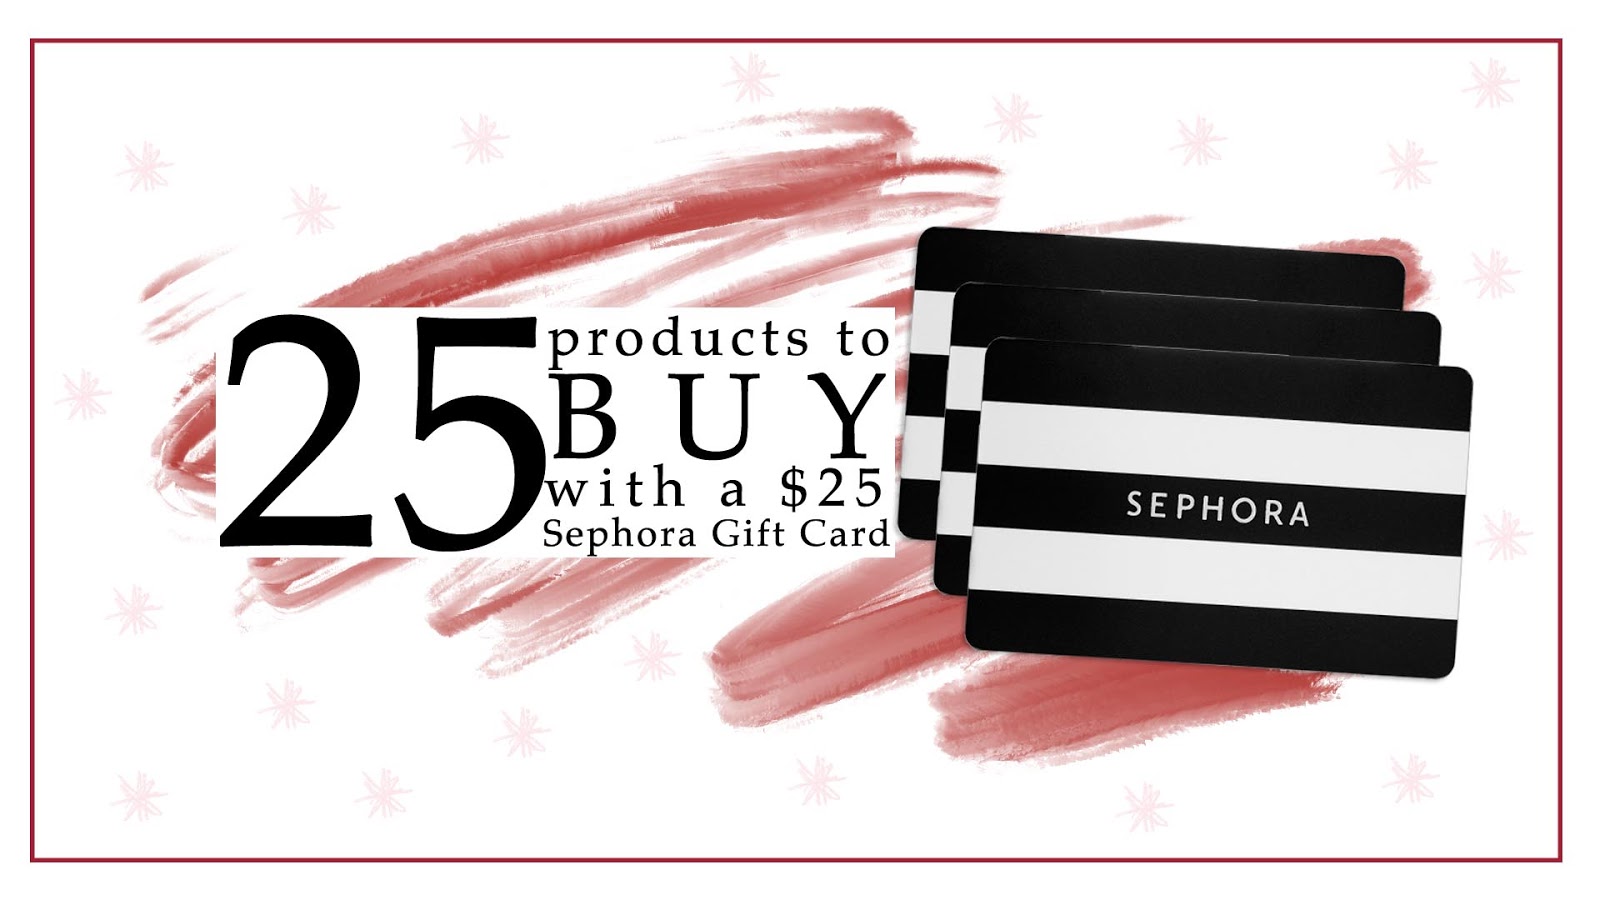 25 things you could buy with a 25 Sephora Gift Card